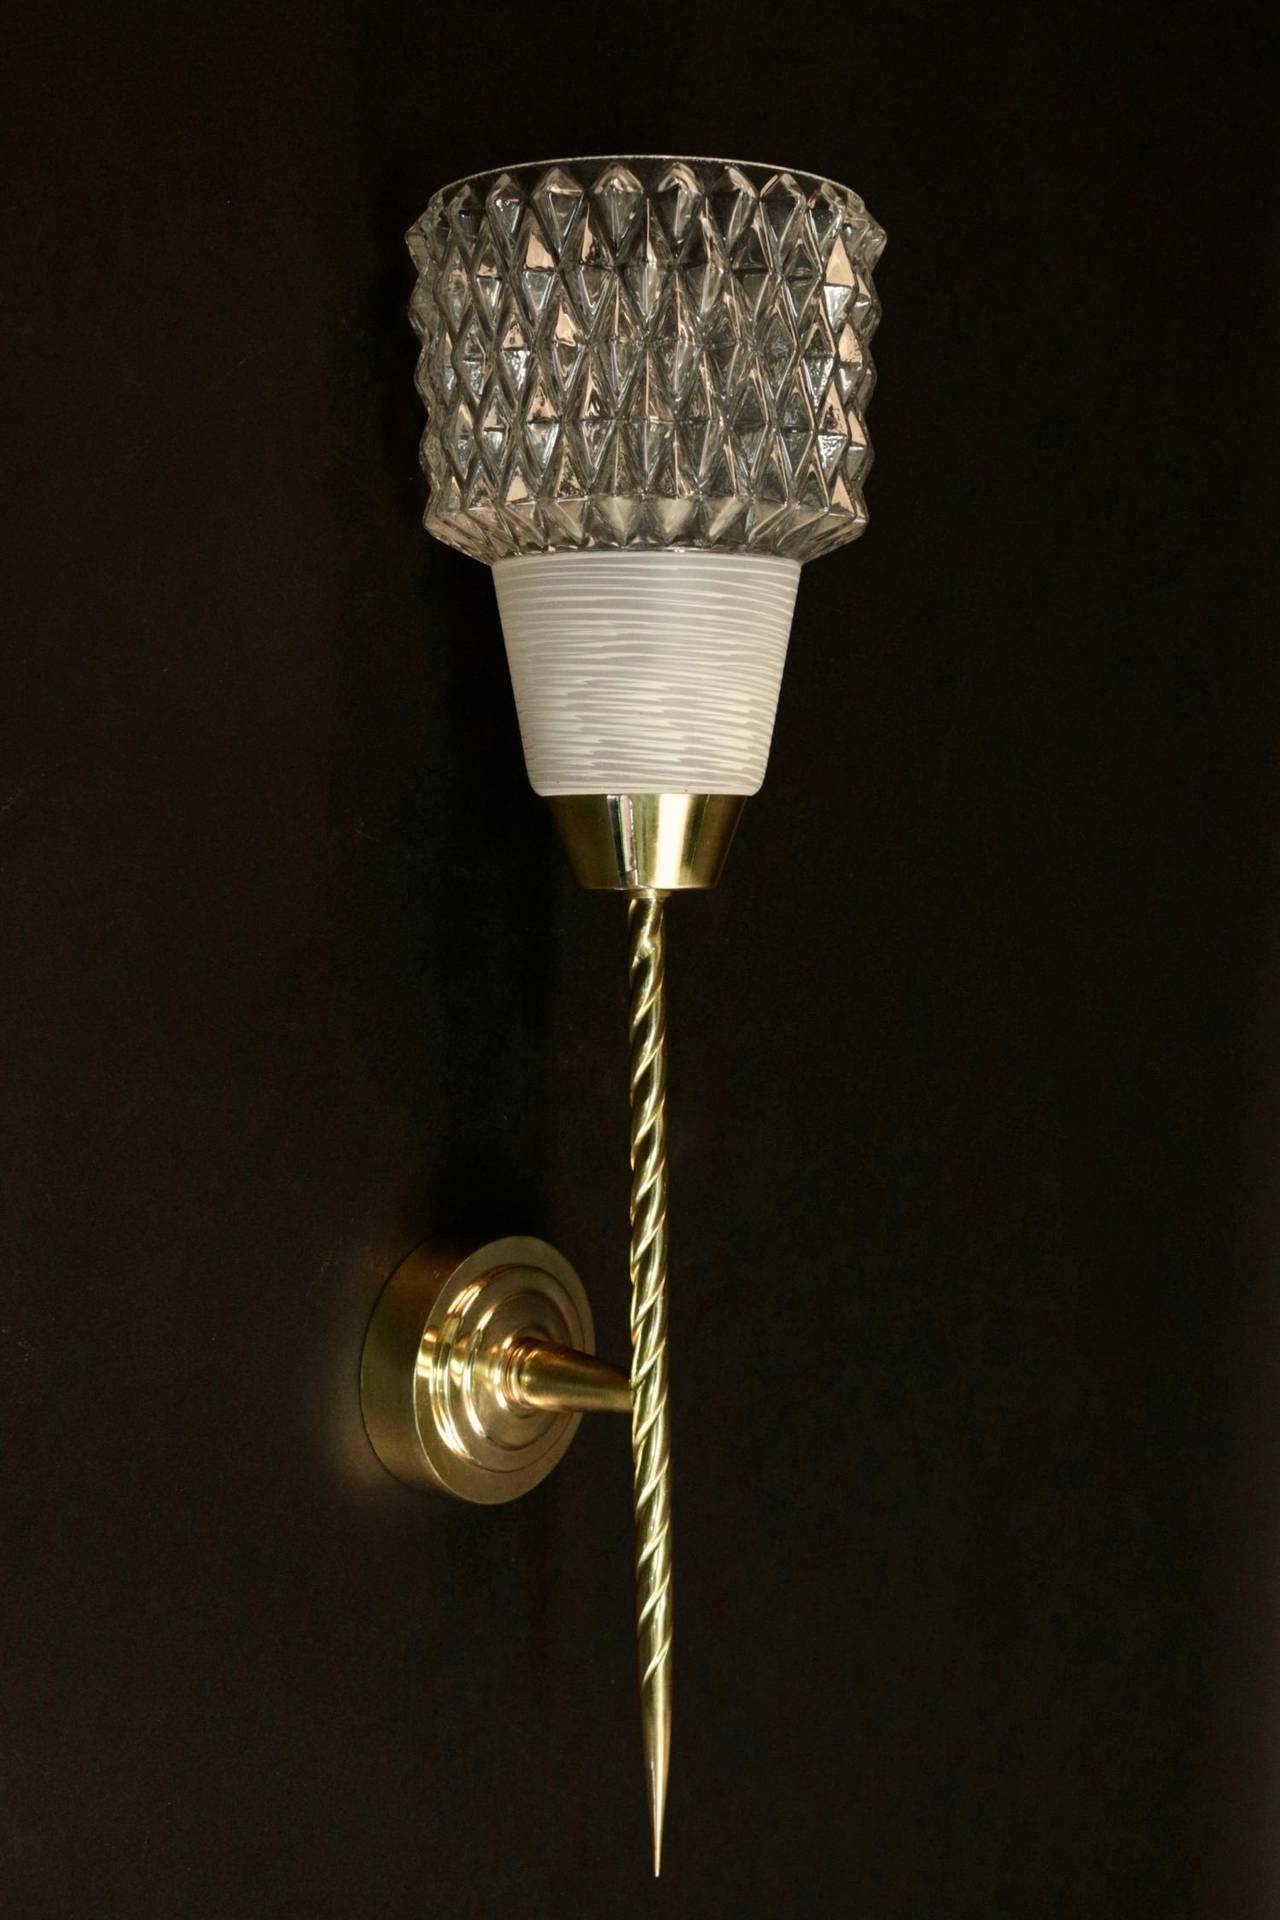 Pair of 1950s flare sconces by Maison Arlus.
Composed of a twisted brass rod enhanced by a glass cup which is diamond shaped on its upper part and soft and mate on its lower part.
One lighted arm per sconce.